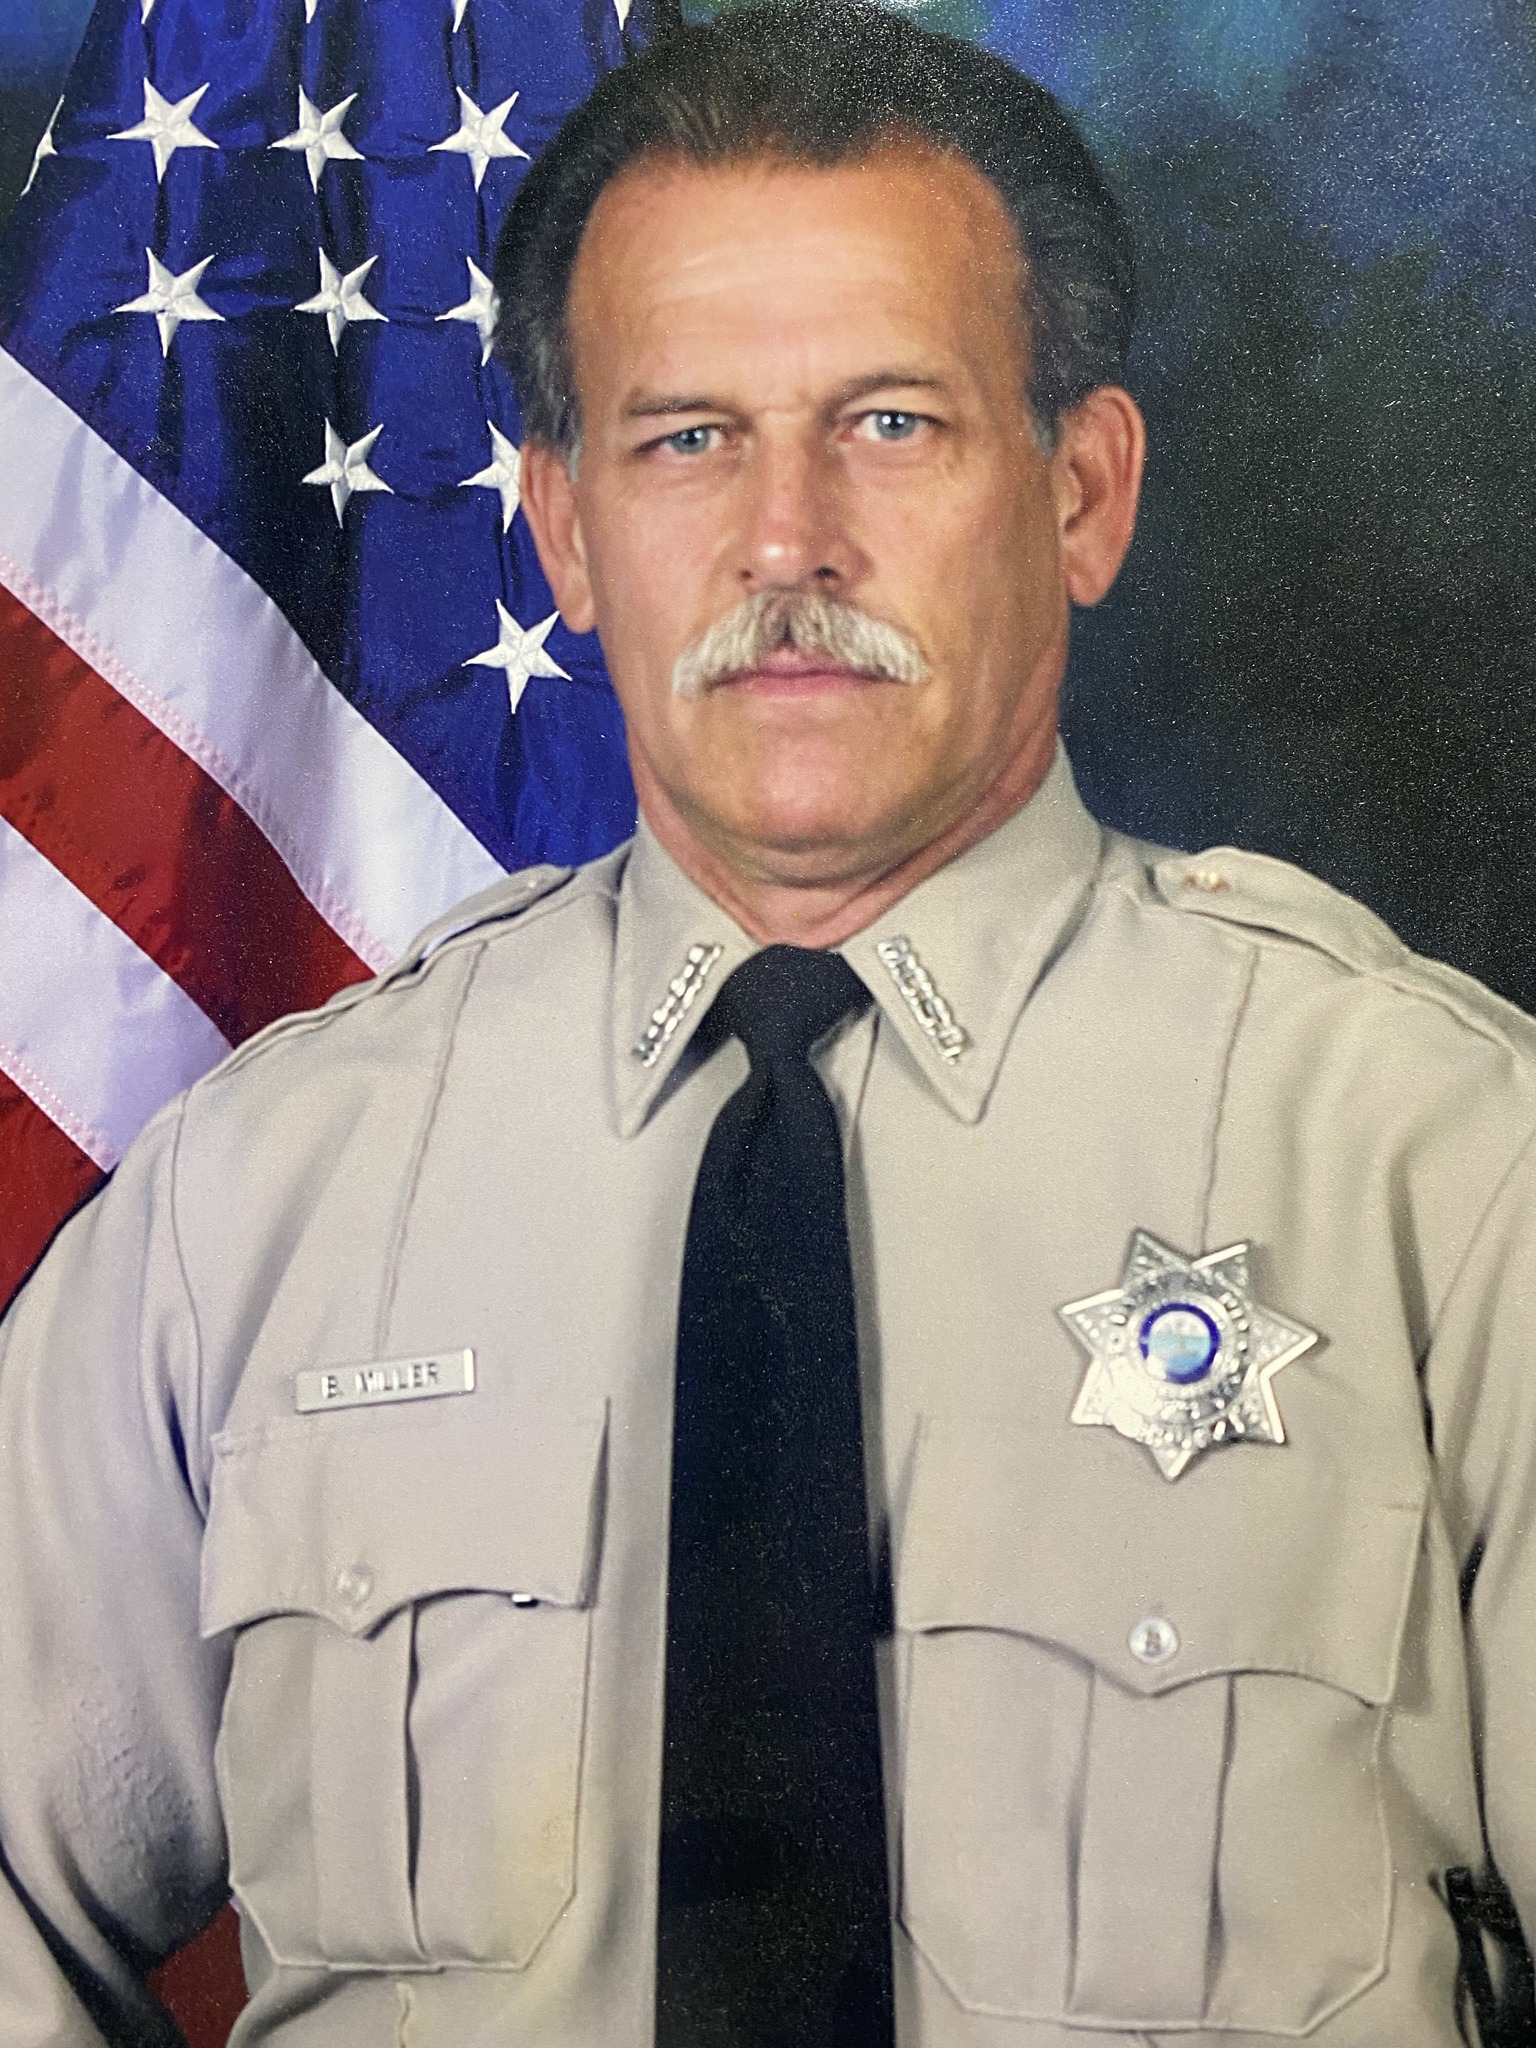 Reserve Deputy Brad Miller | Maury County Sheriff's Office, Tennessee